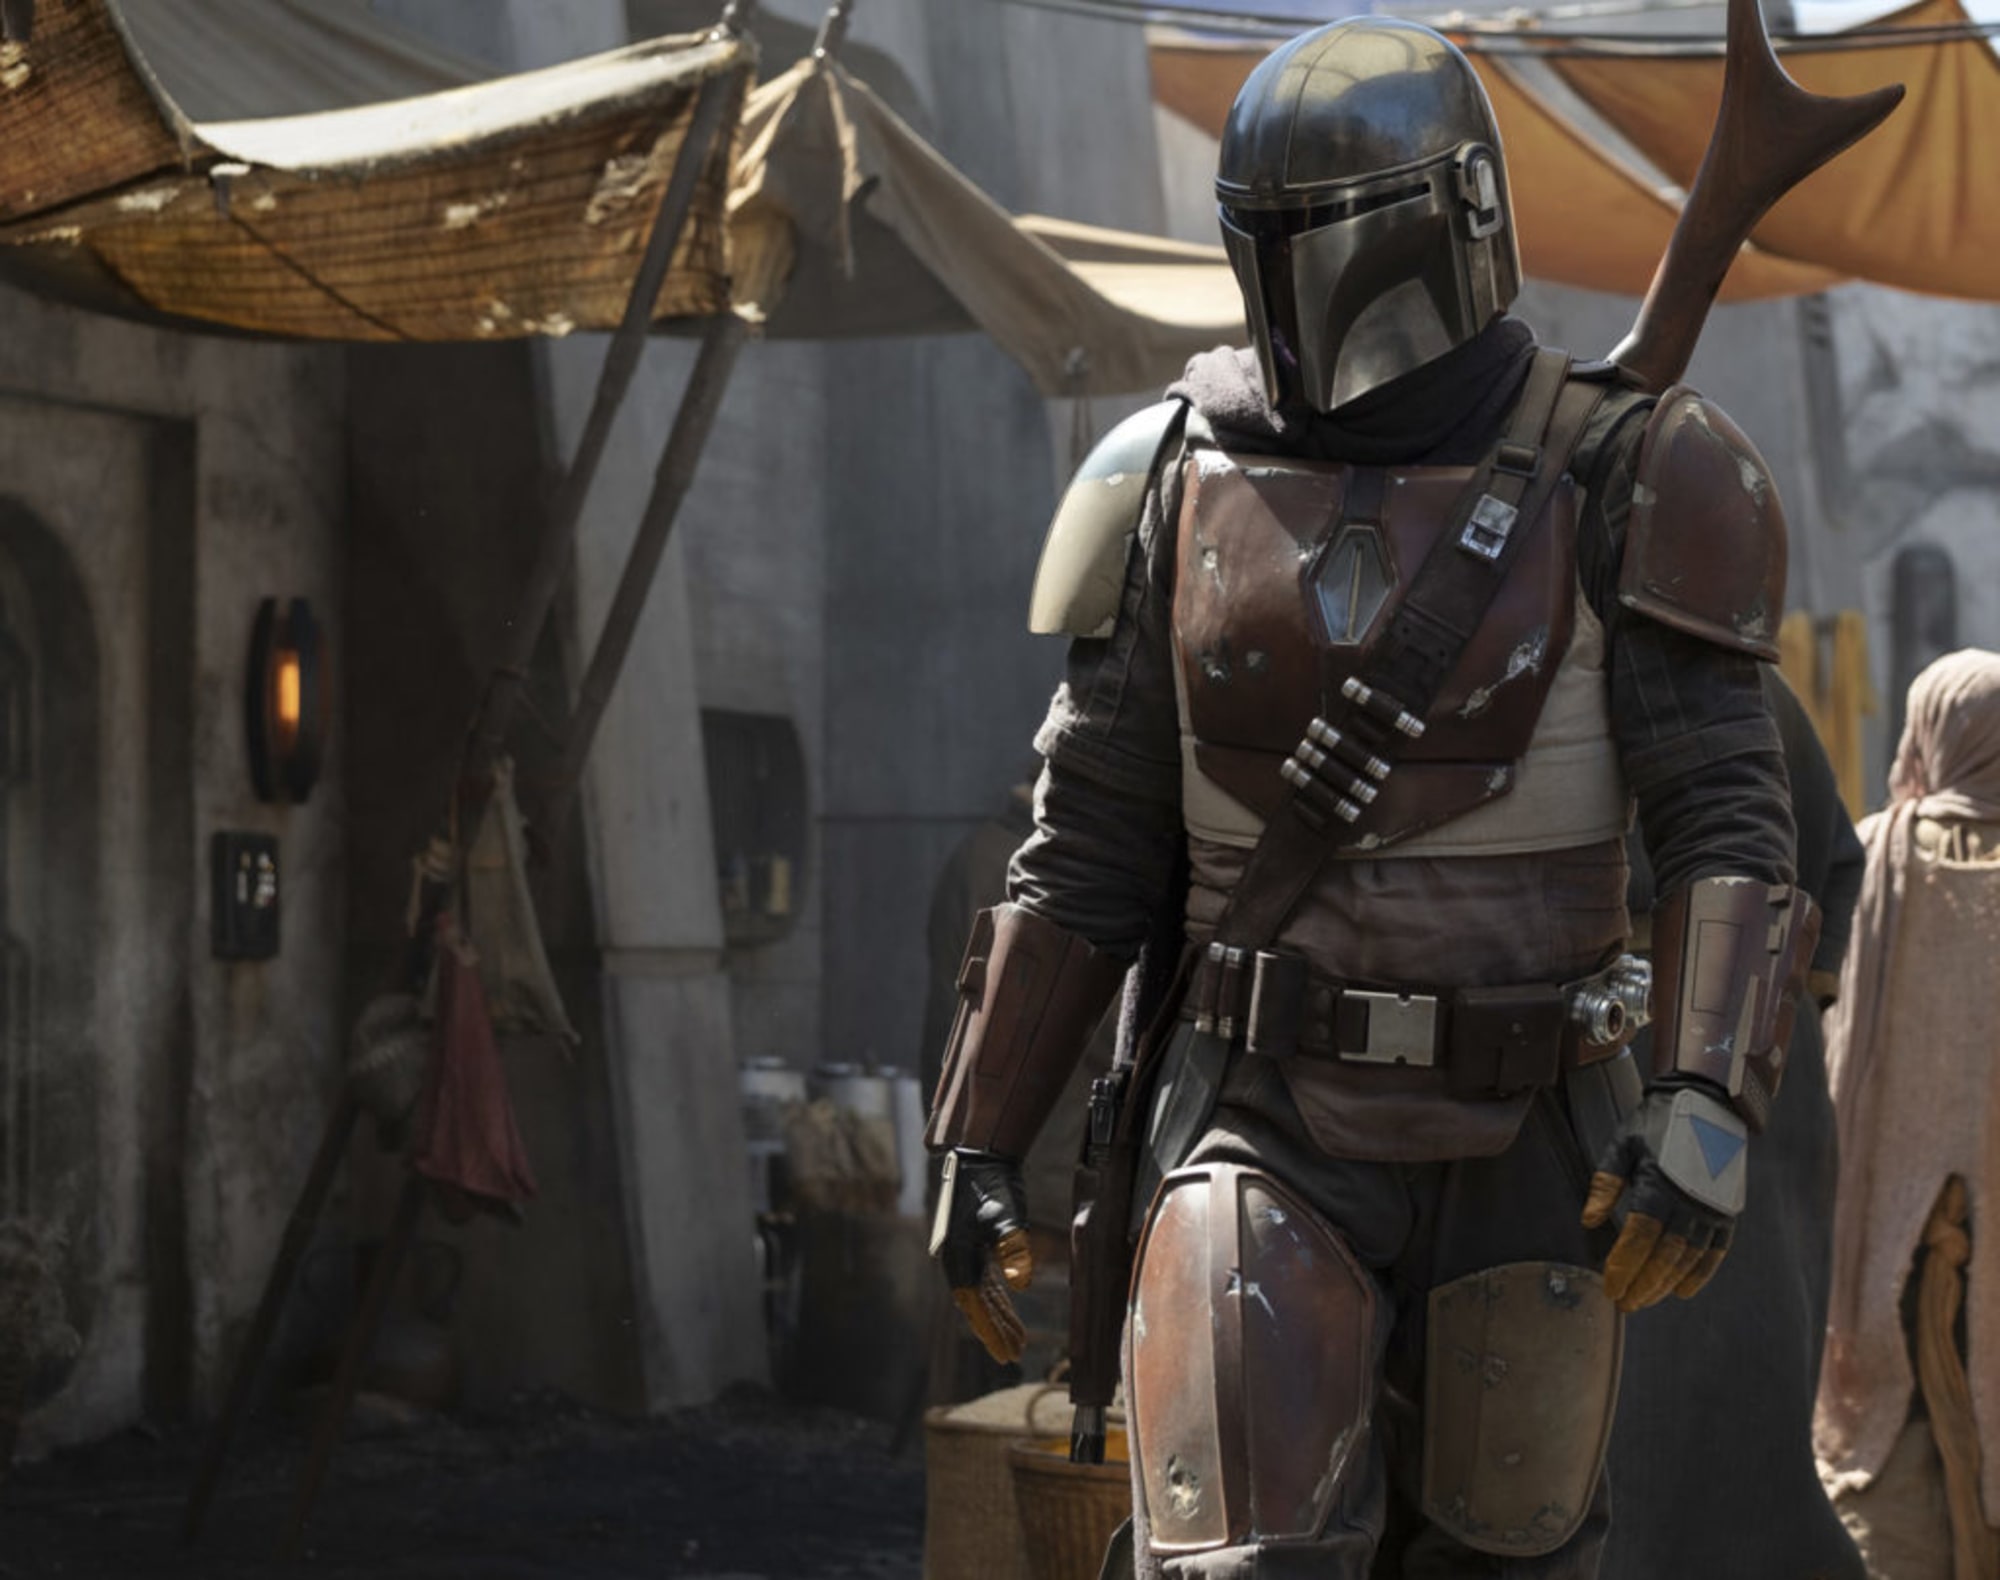 Check out new promo images for Disney's The Mandalorian